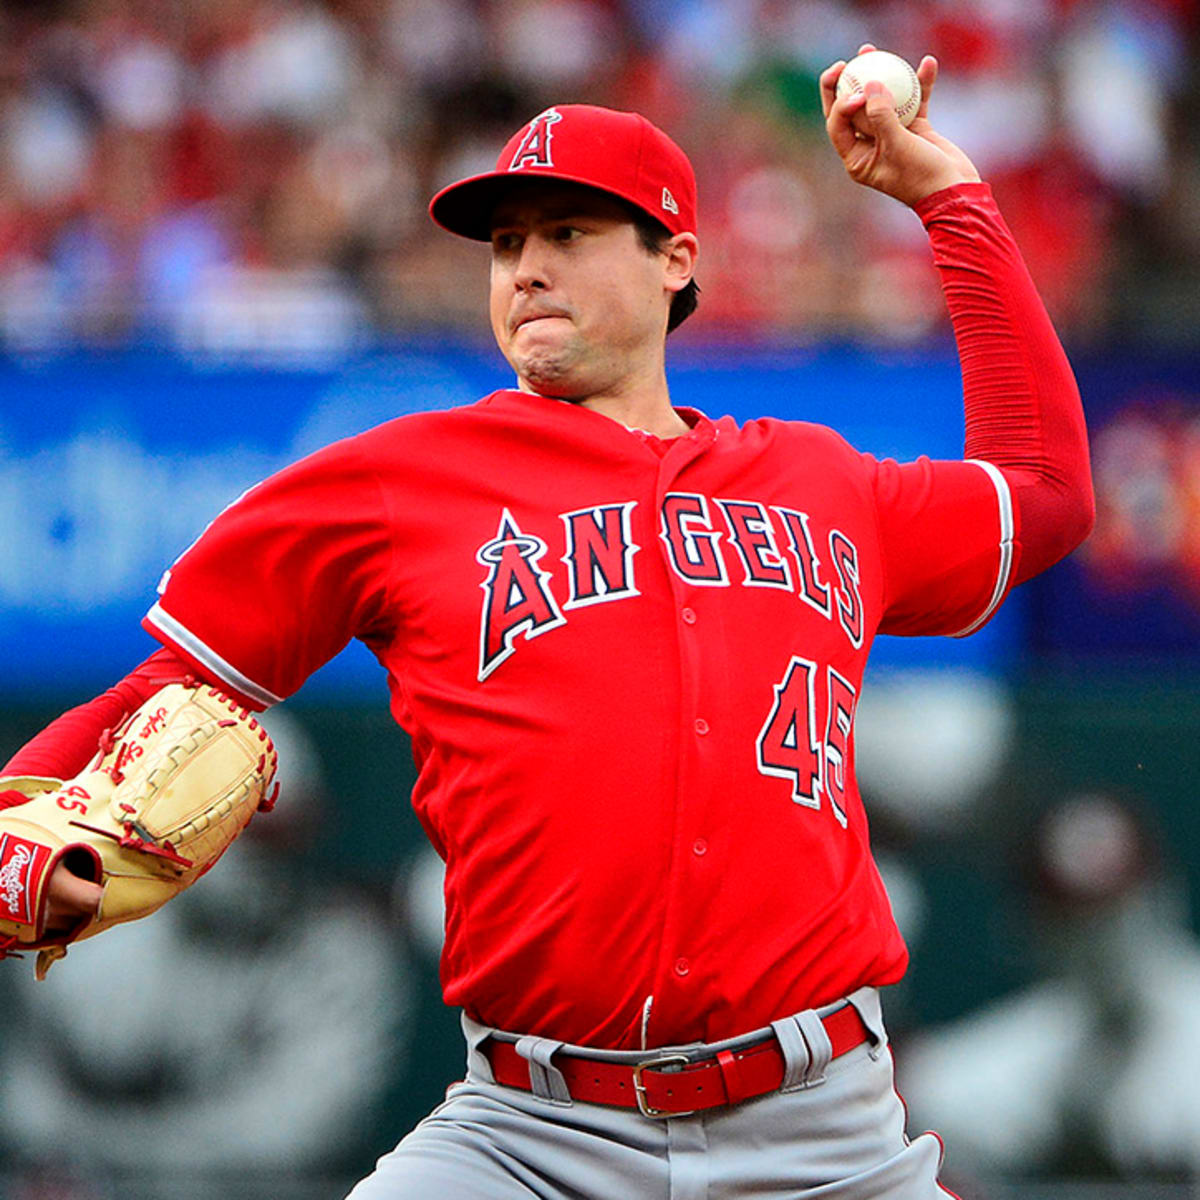 Tyler Skaggs's family sues Angles over pitcher's death - Sports Illustrated